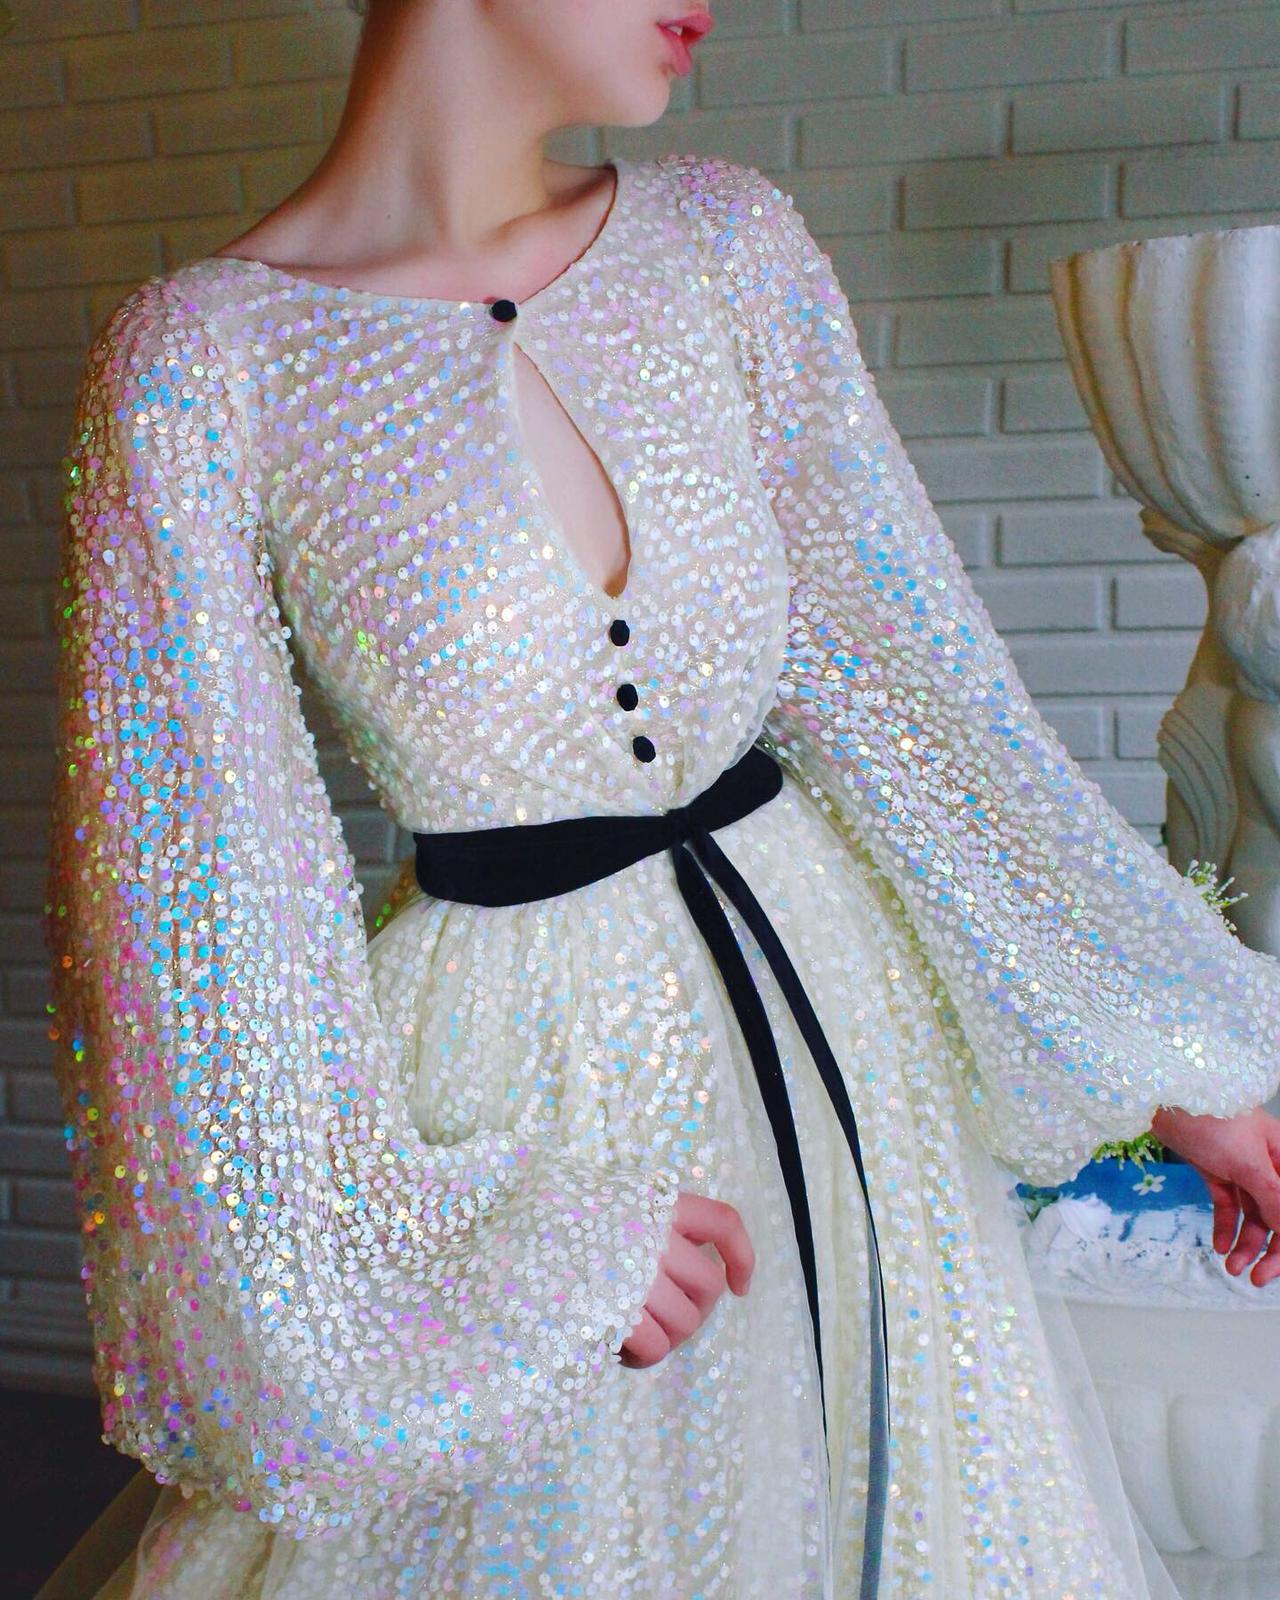 White A-Line dress with sequins and long sleeves